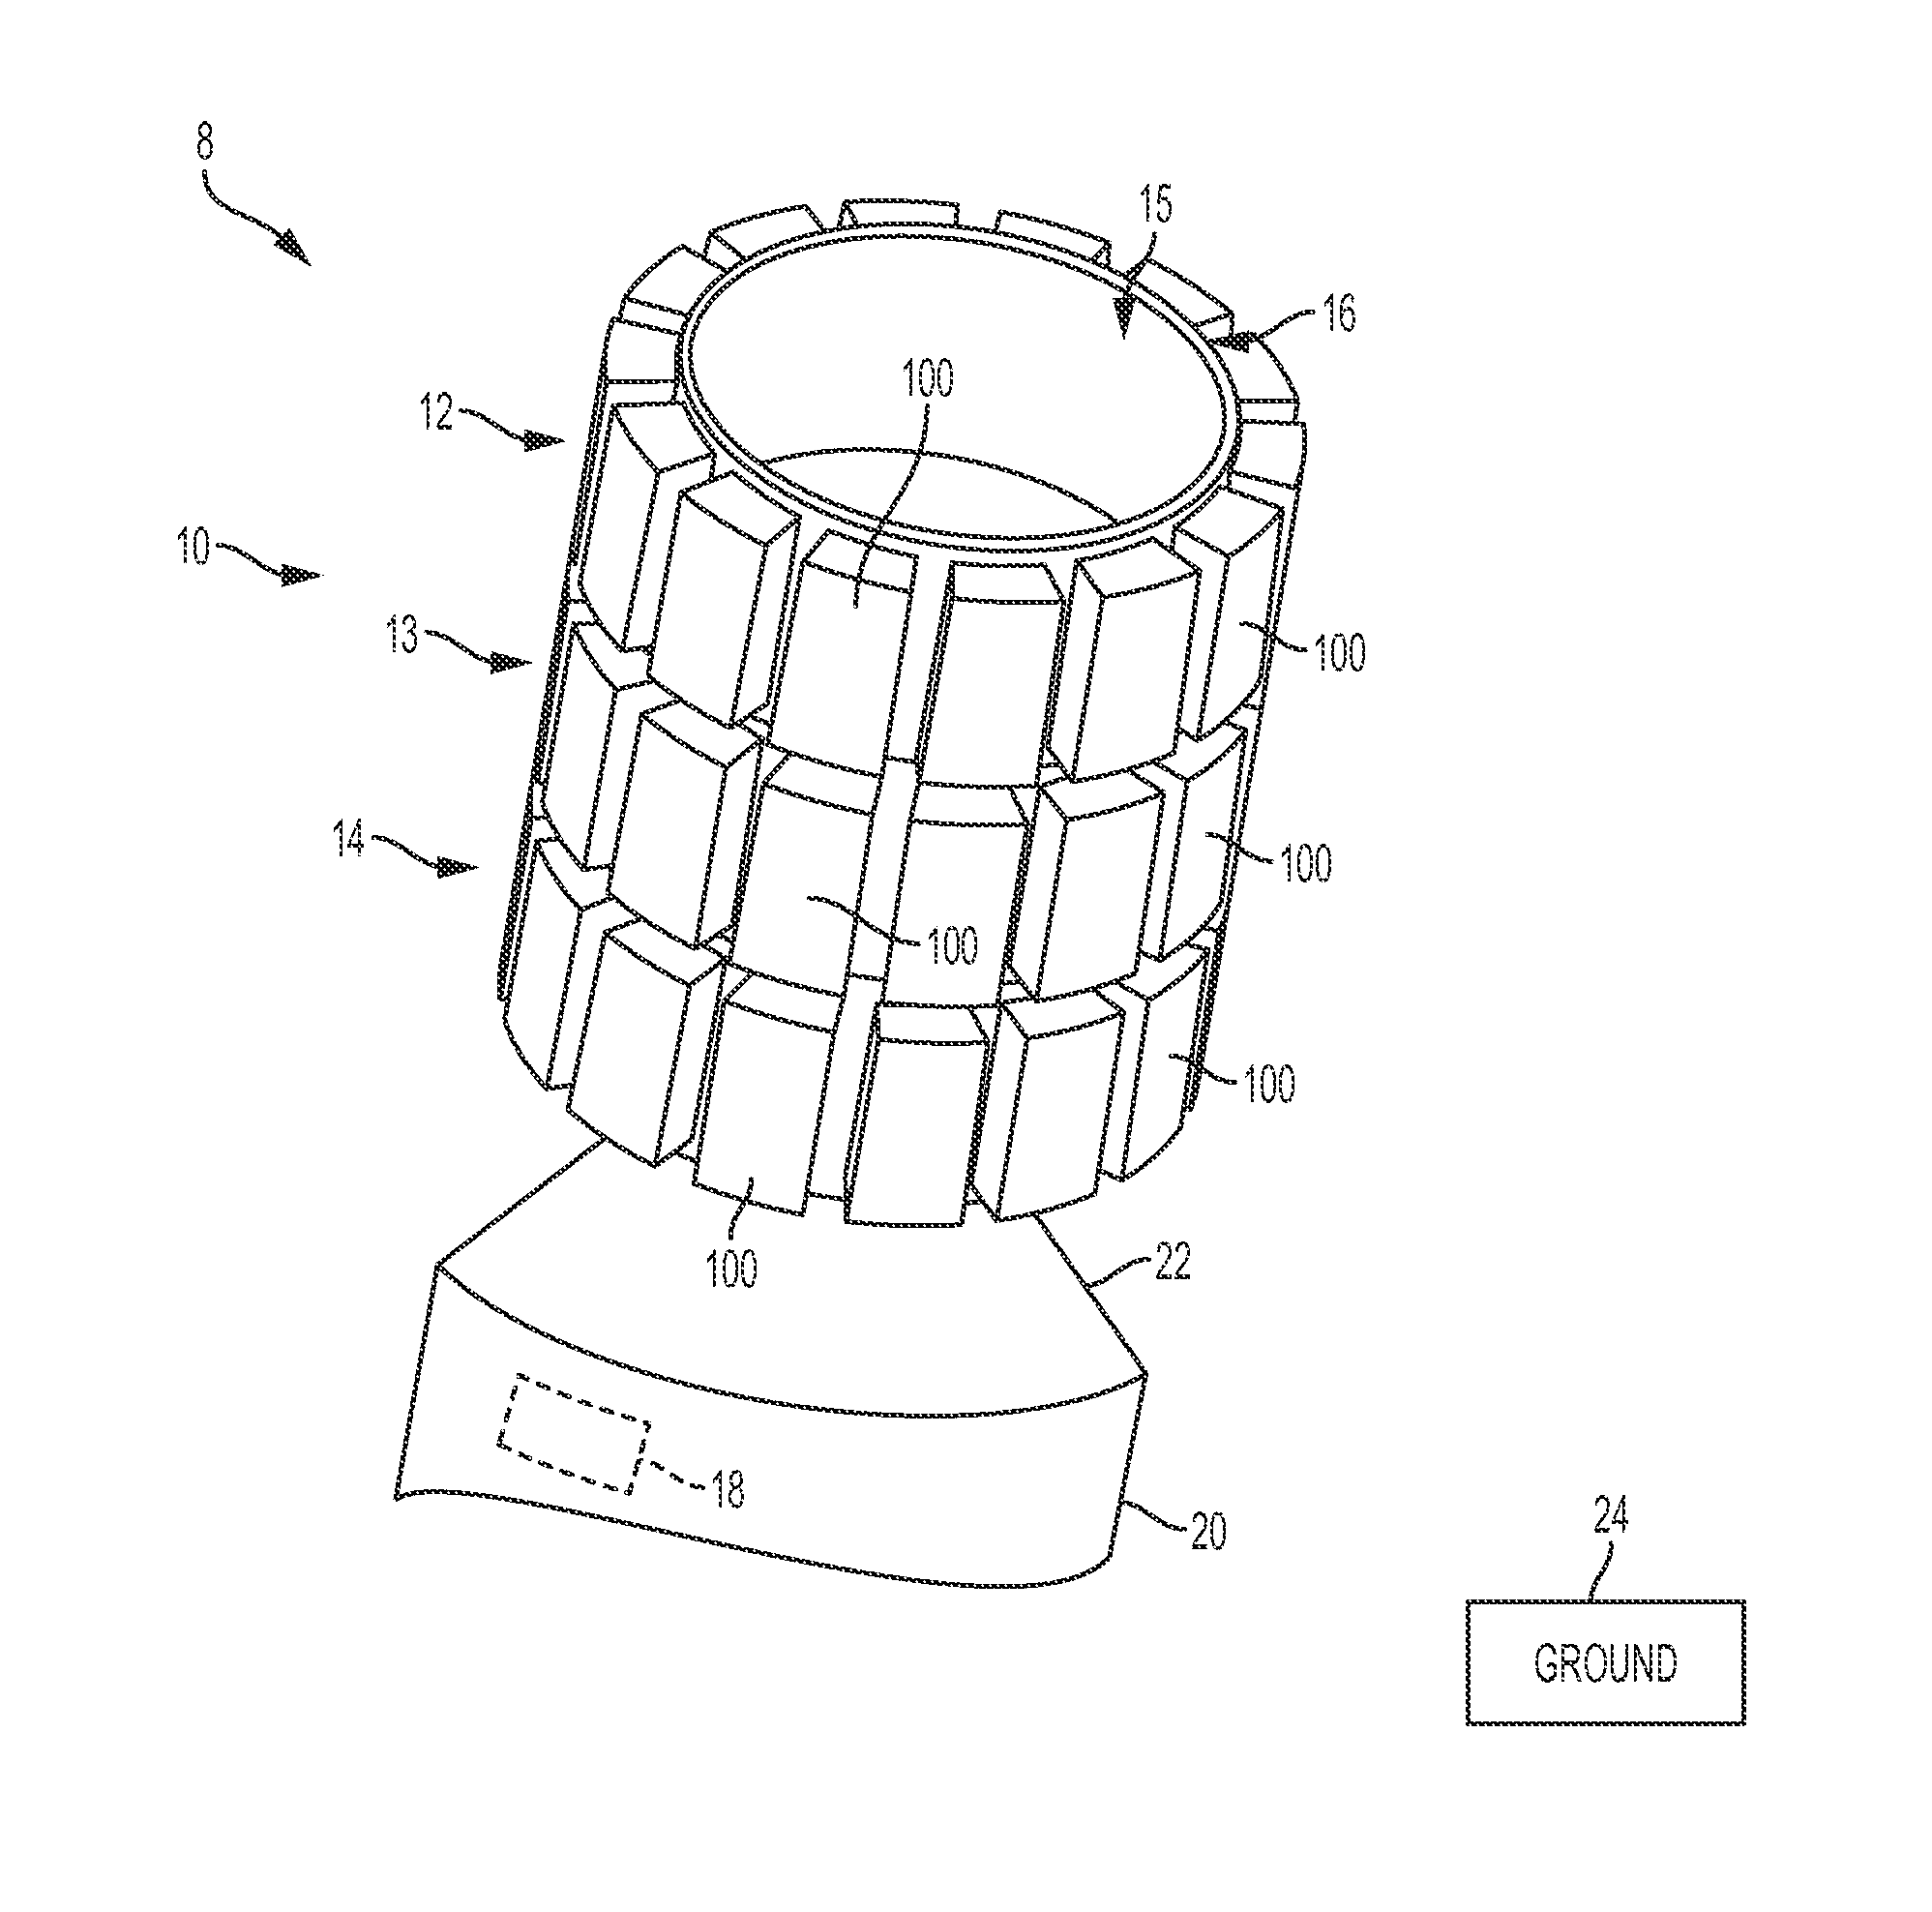 System and method for assembling and deploying satellites